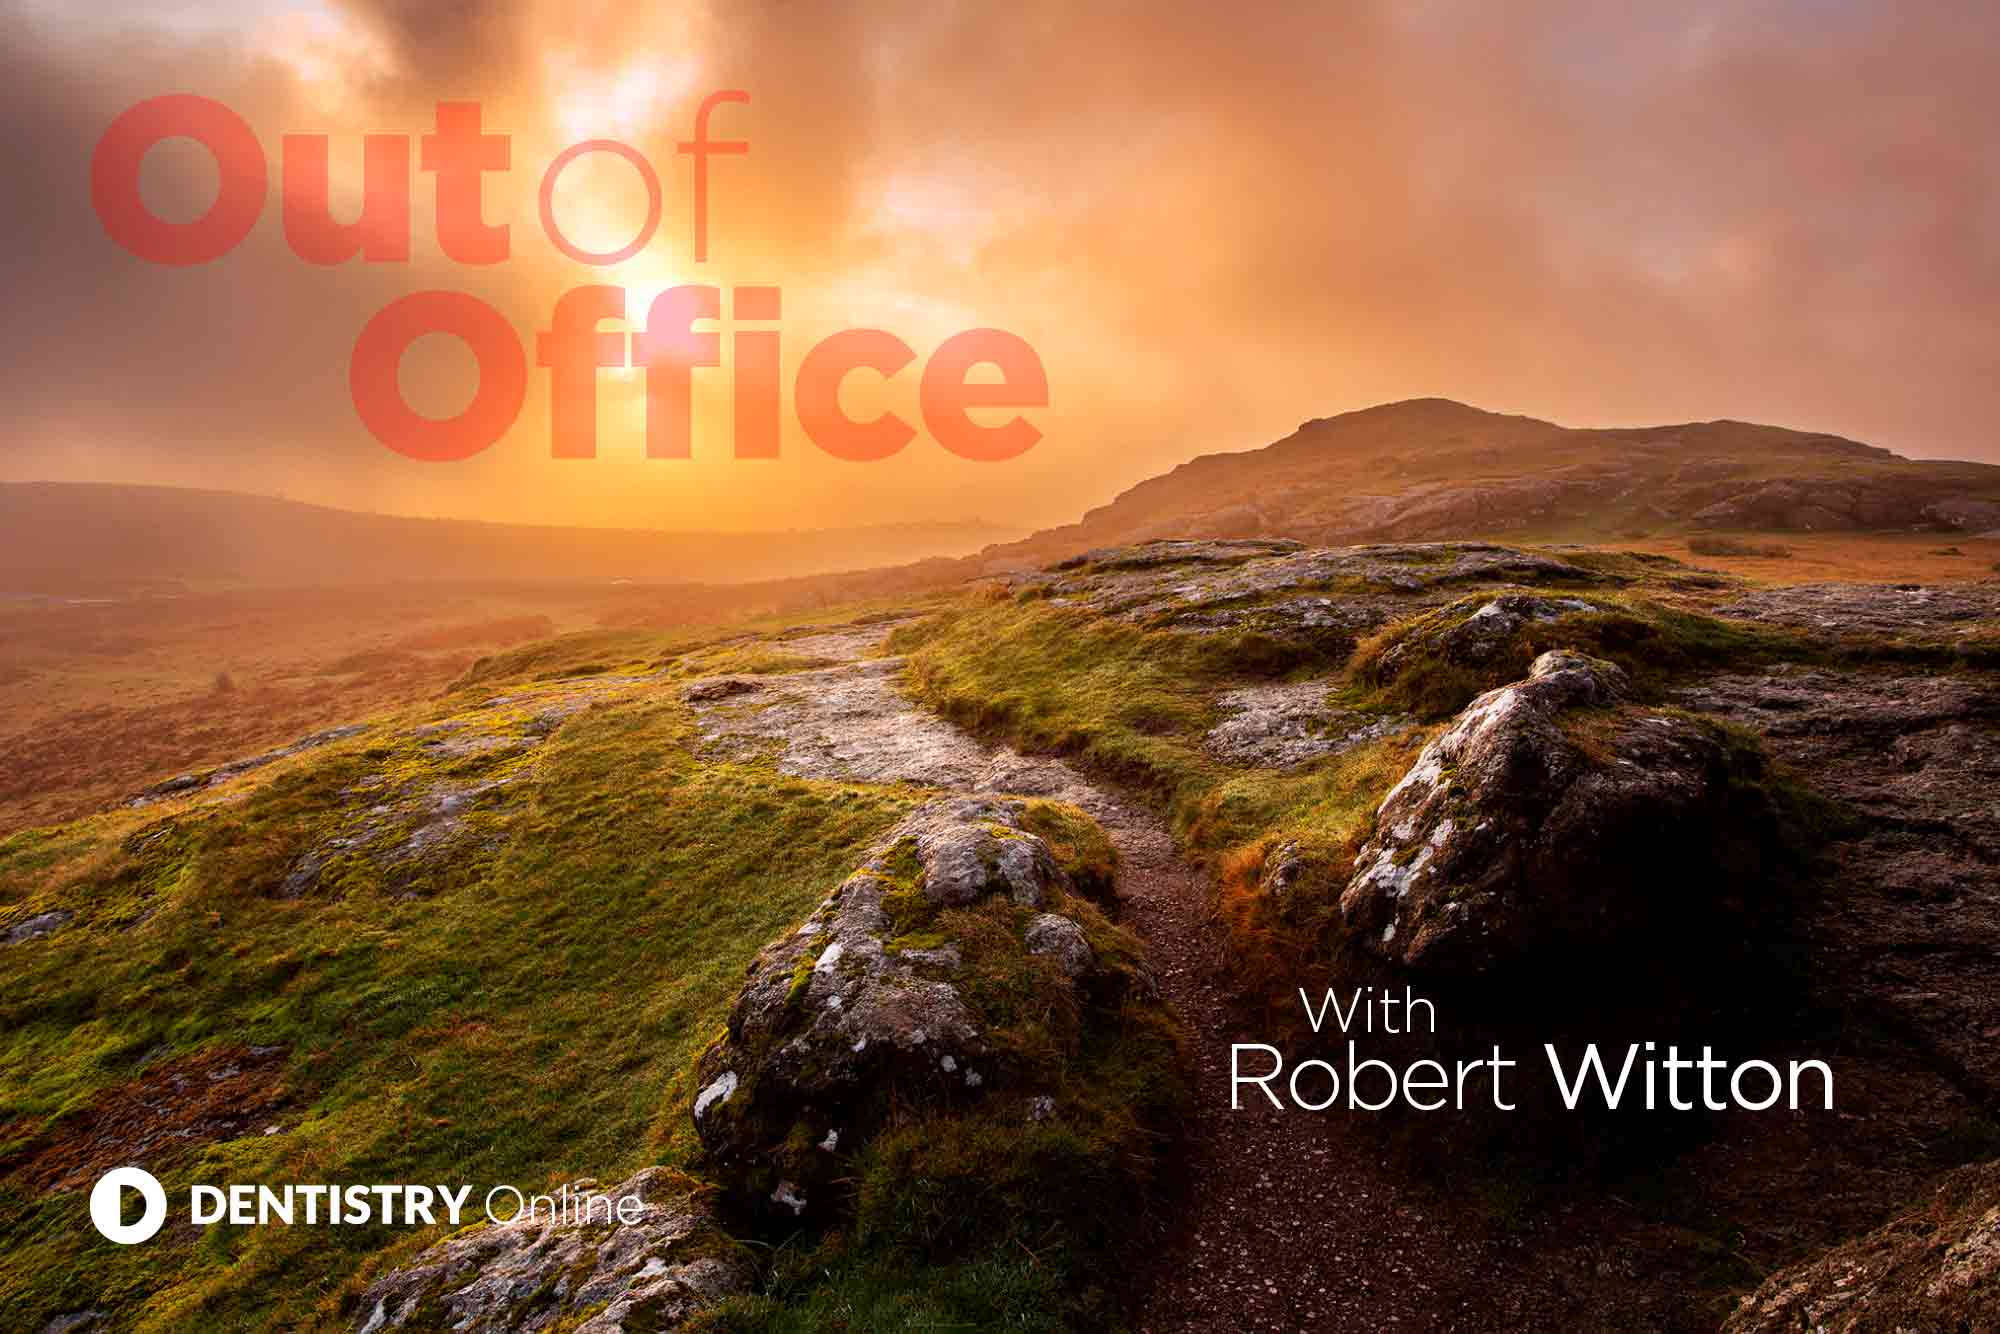 Robert Witton discusses why living in Plymouth helps him to maintain a healthy work-life balance